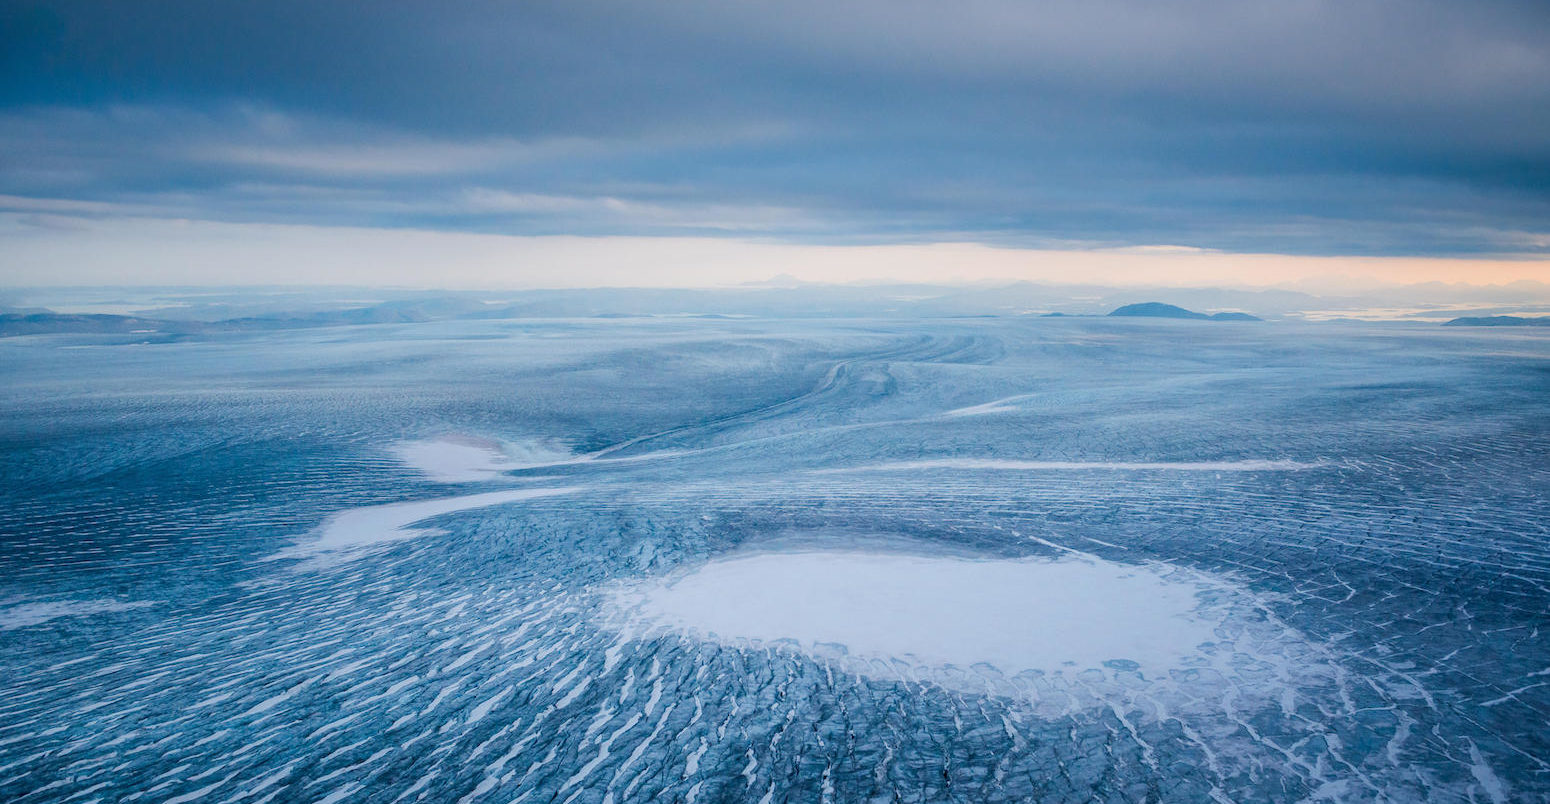 Aerial view of the ice sheet, Greenland. Credit: imageBROKER / Alamy Stock Photo.